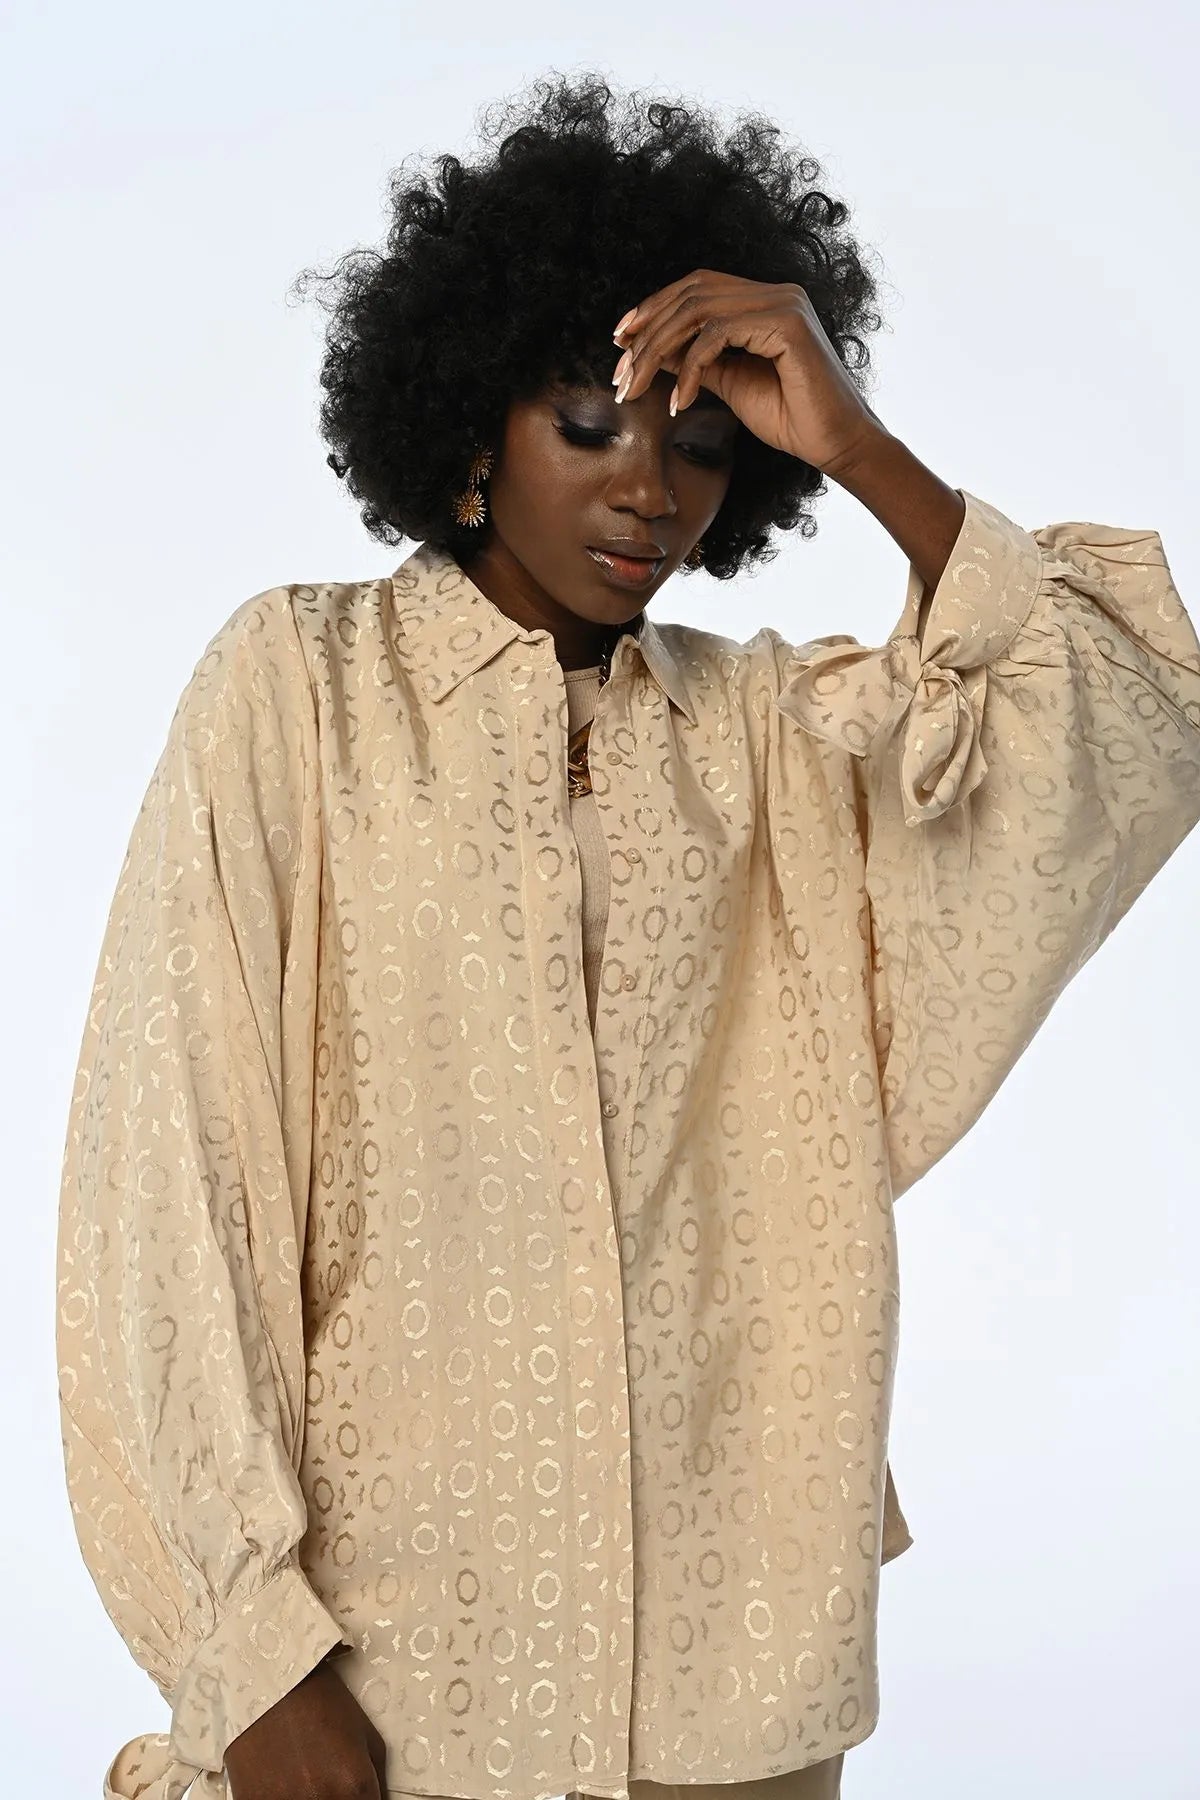 GEOMETRIC PATTERNED BEIGE SHIRT WITH BOUND SLEEVES OVERSIZE FIT - Lebbse